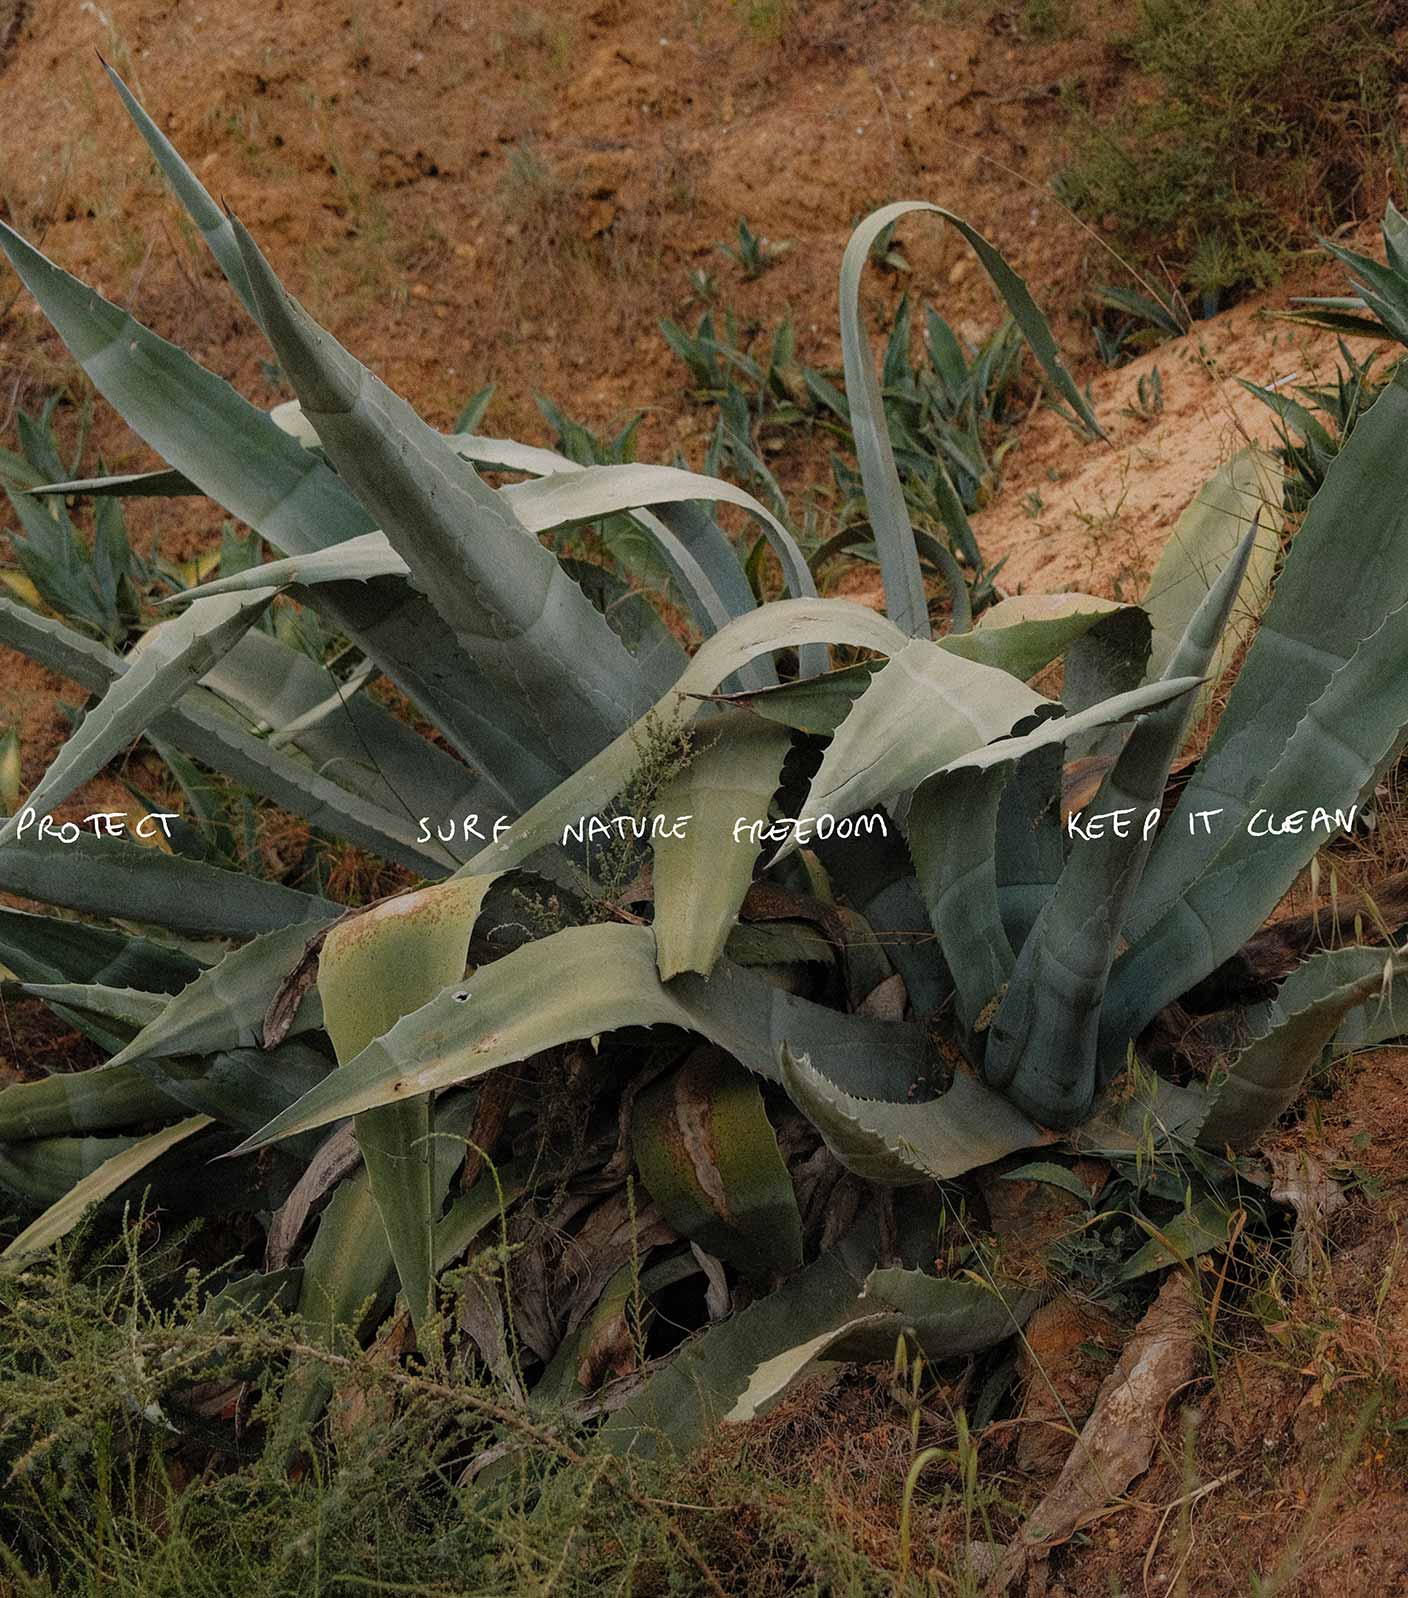 A wild agave plant growing on the cliffs of Portugal with text written on the photo that says 